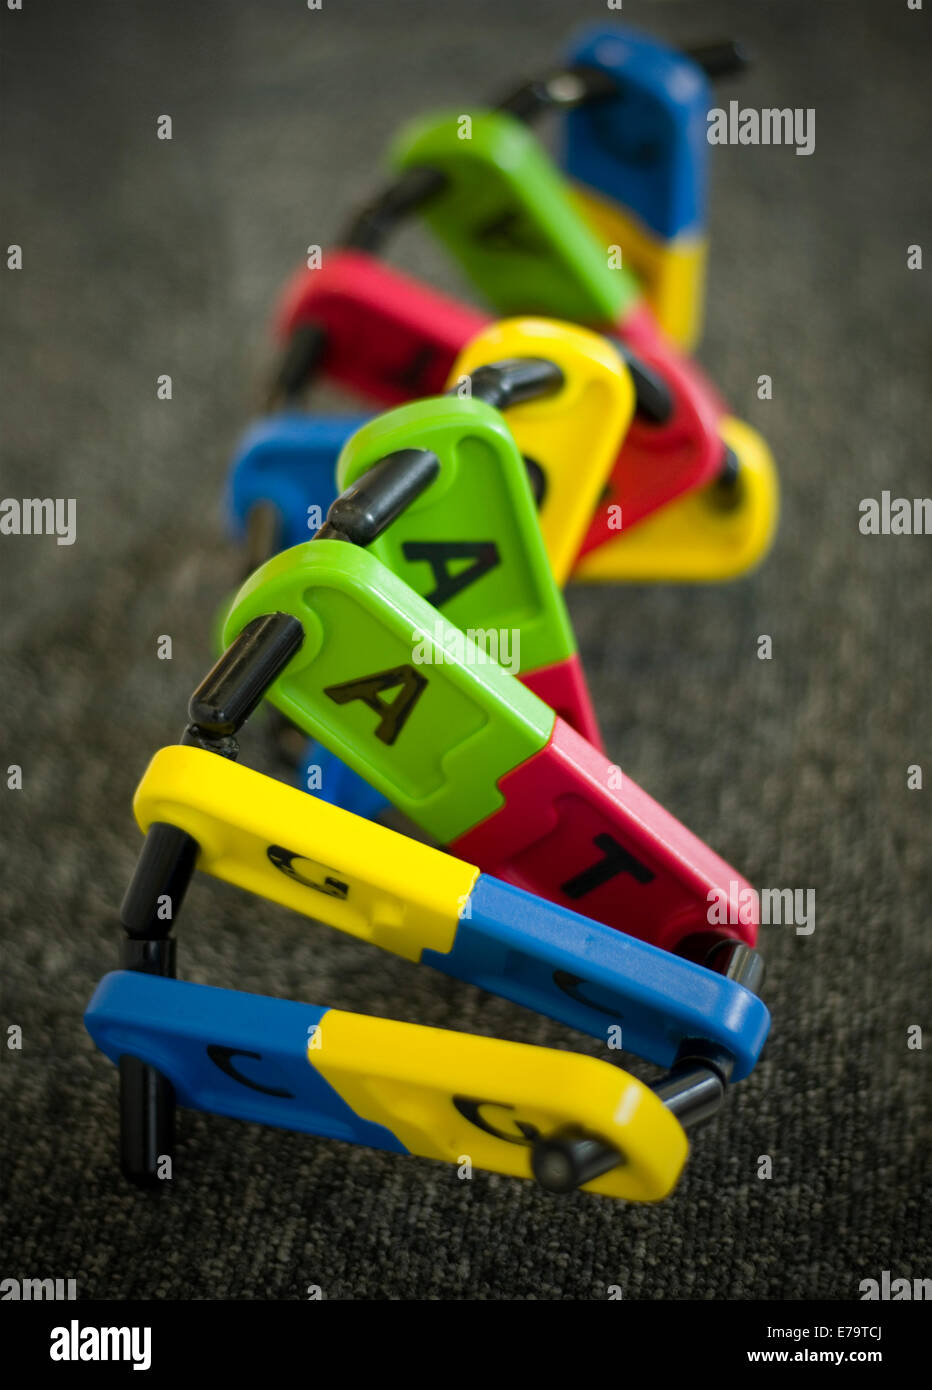 DNA model showing base pairs AT and CG (A - Adenine T - Thymine G - Guanine C - Cytosine) Stock Photo